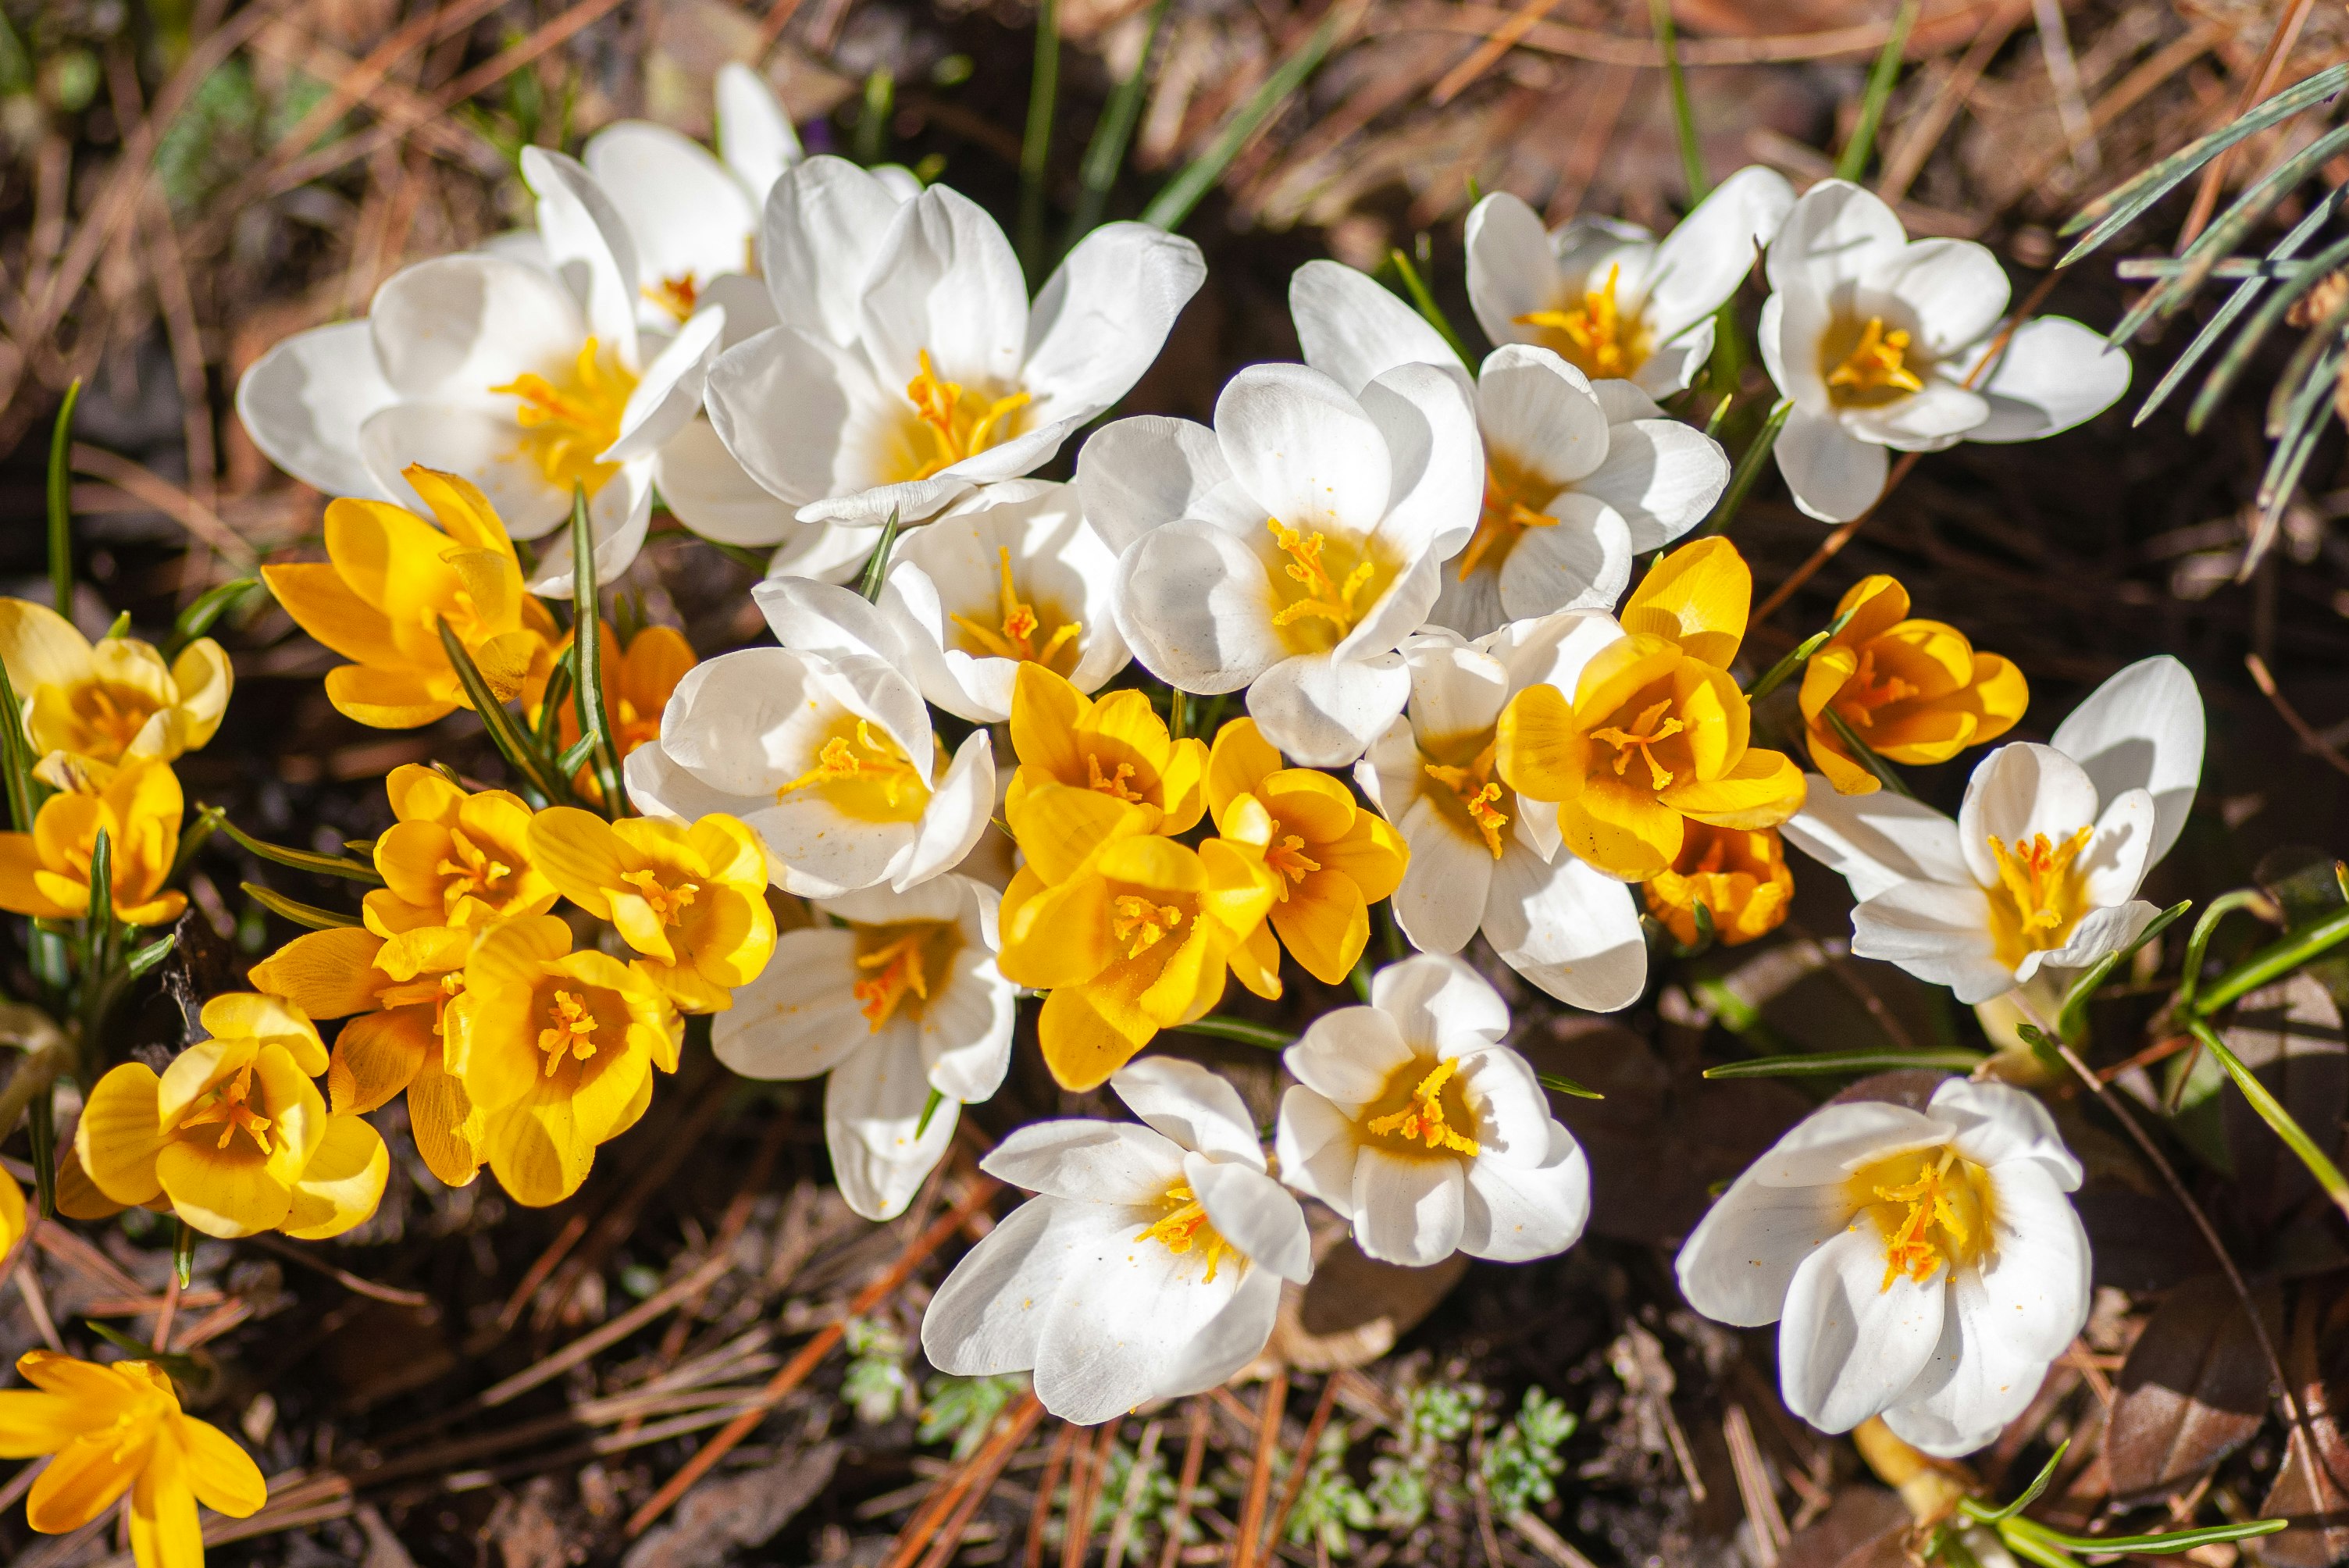 yellow and white daffodils in bloom during daytime